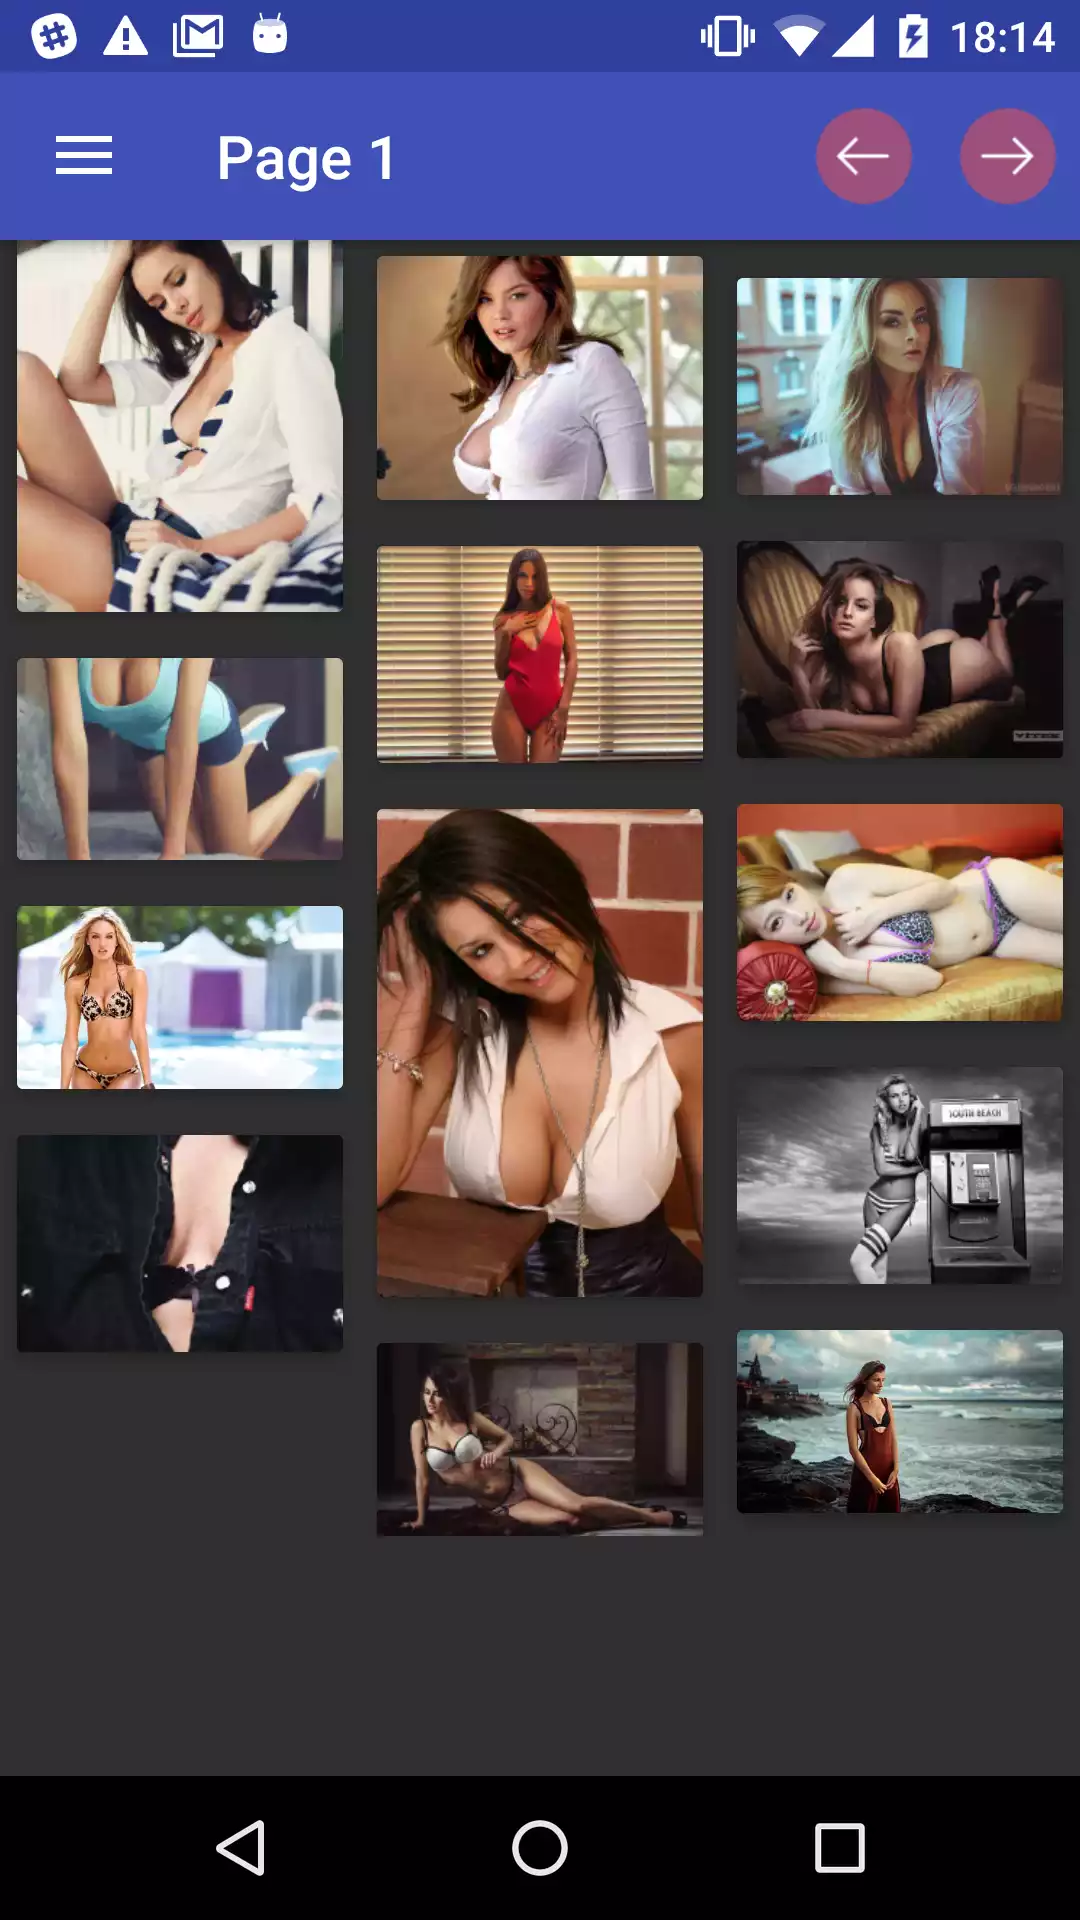 Cleavage Backgrounds pucs,henti,hot,pics,porn,sexy,new,pic,app,apps,apk,backgrounds,hentai,femboy,images,pornstar,manga,adult,search,pornstarphoto,android,photos,download,video,wallpapers